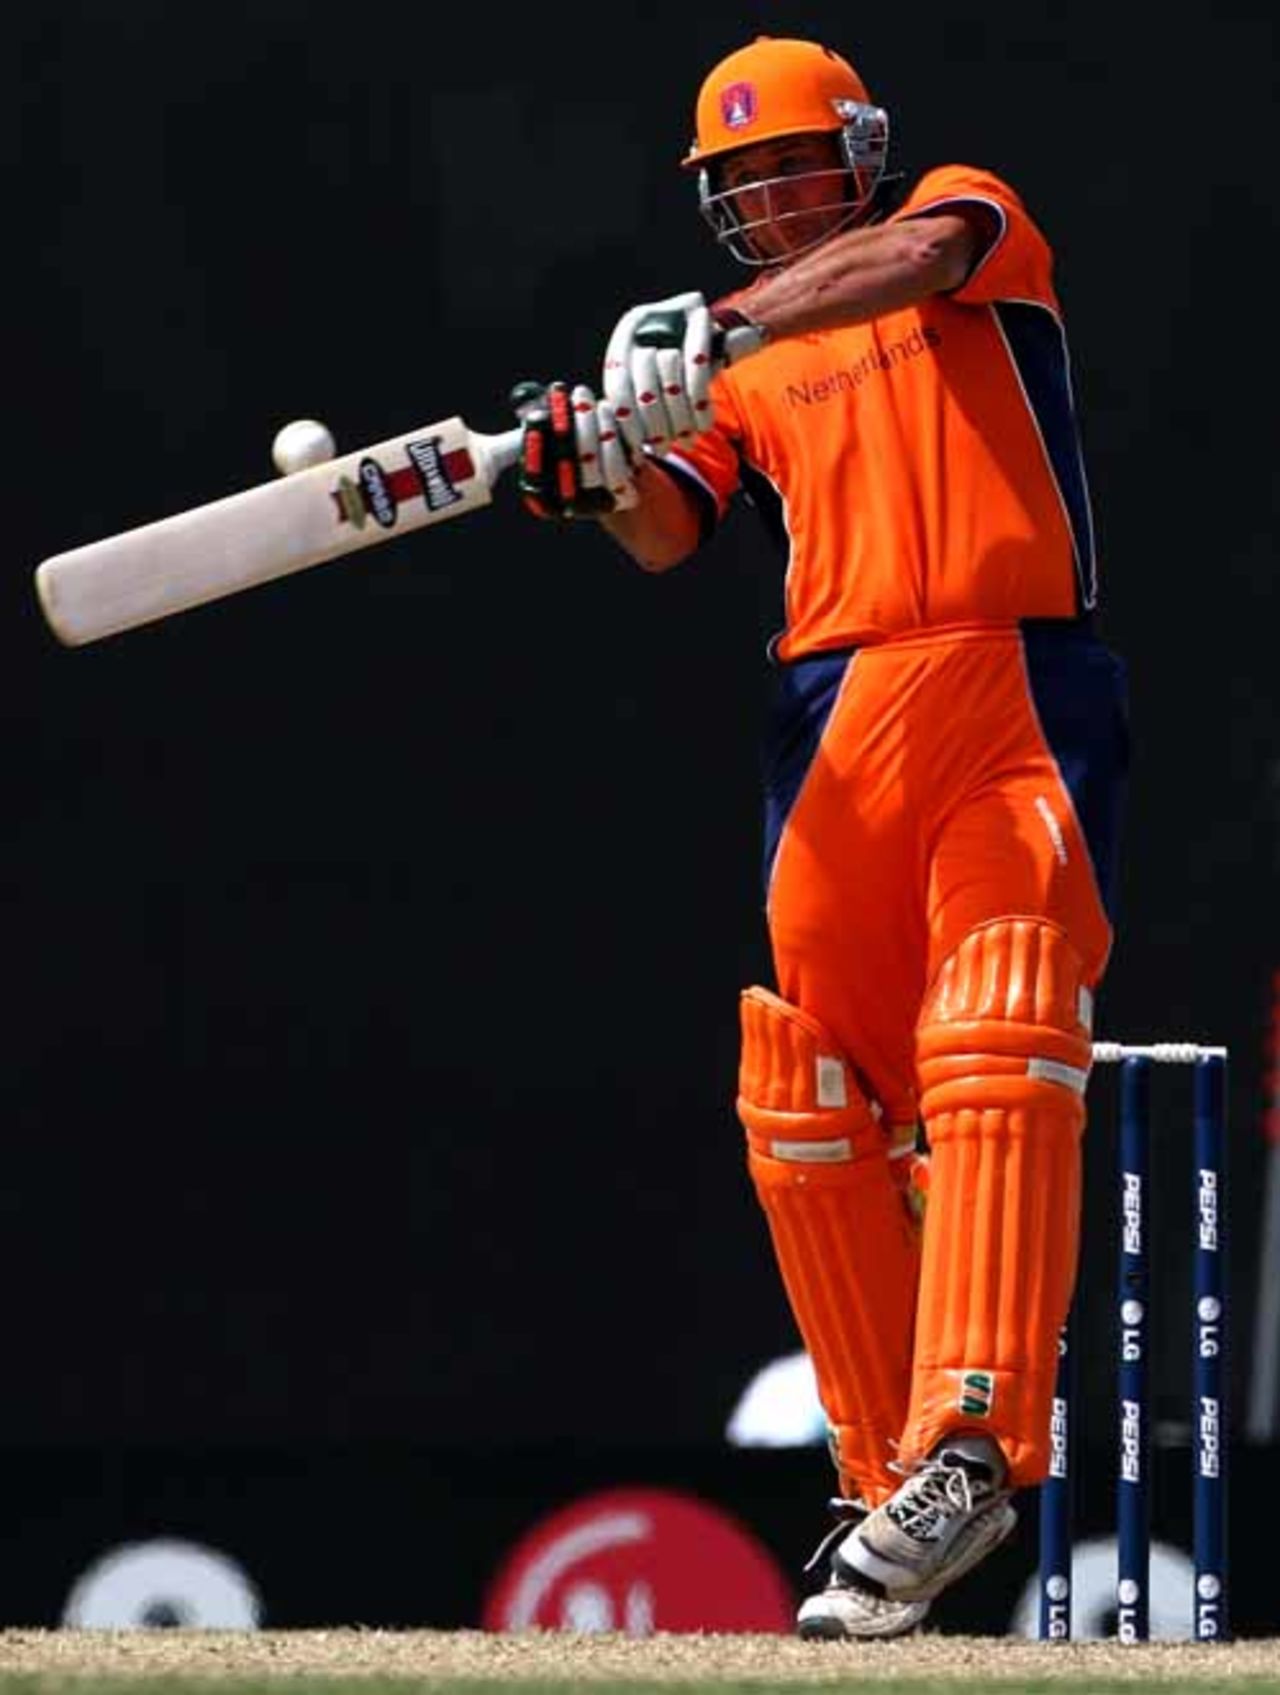 Darron Reekers was the only Netherlands top-order batsman to get to double figures, Australia v Netherlands, Group A, St Kitts, March 18, 2007